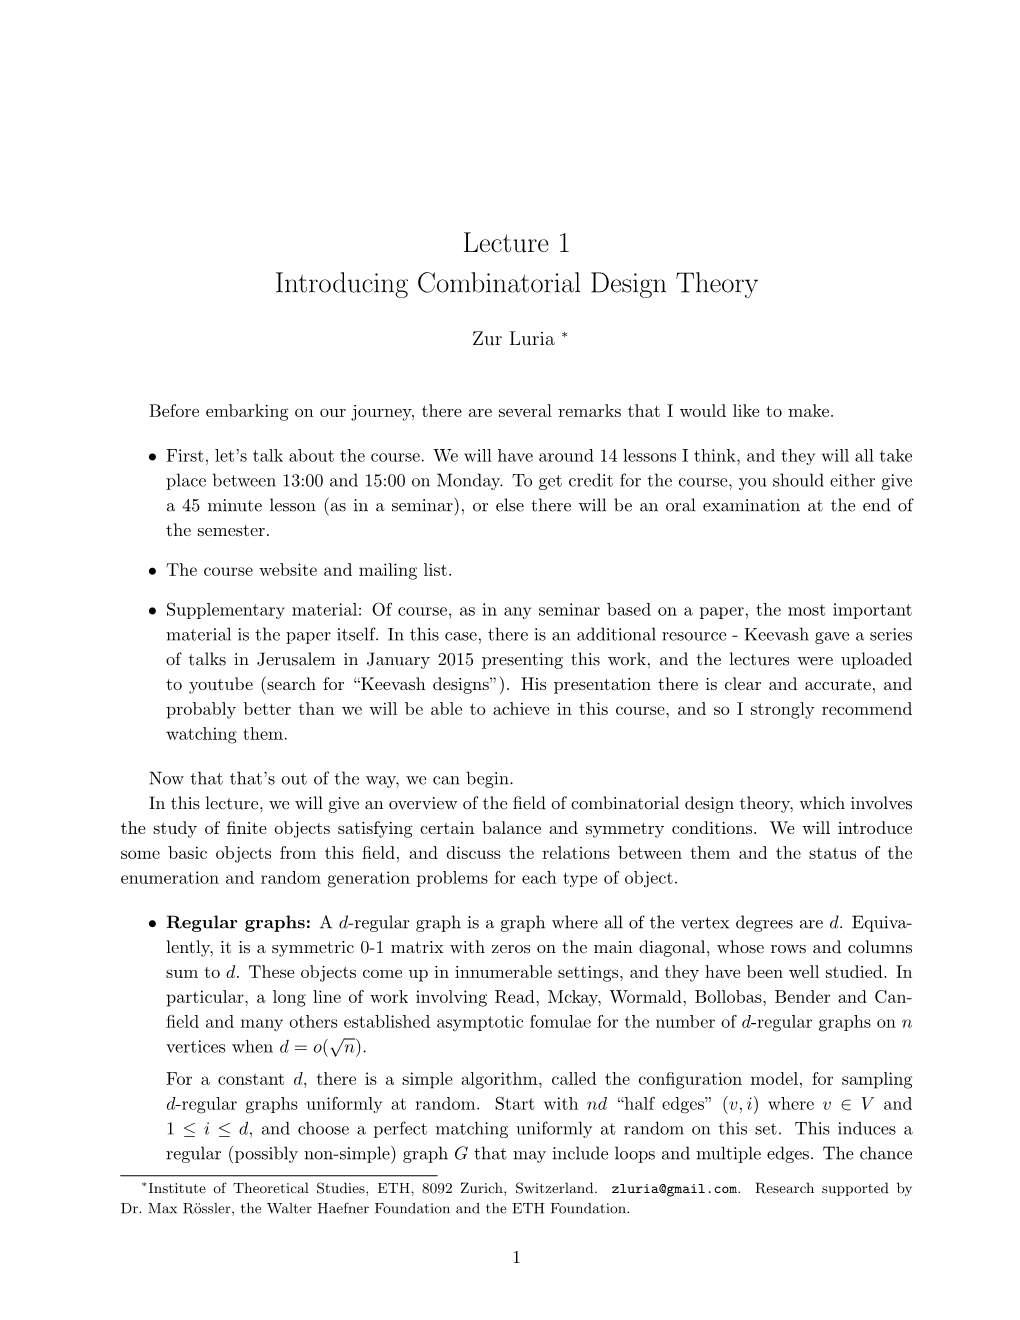 Lecture 1 Introducing Combinatorial Design Theory